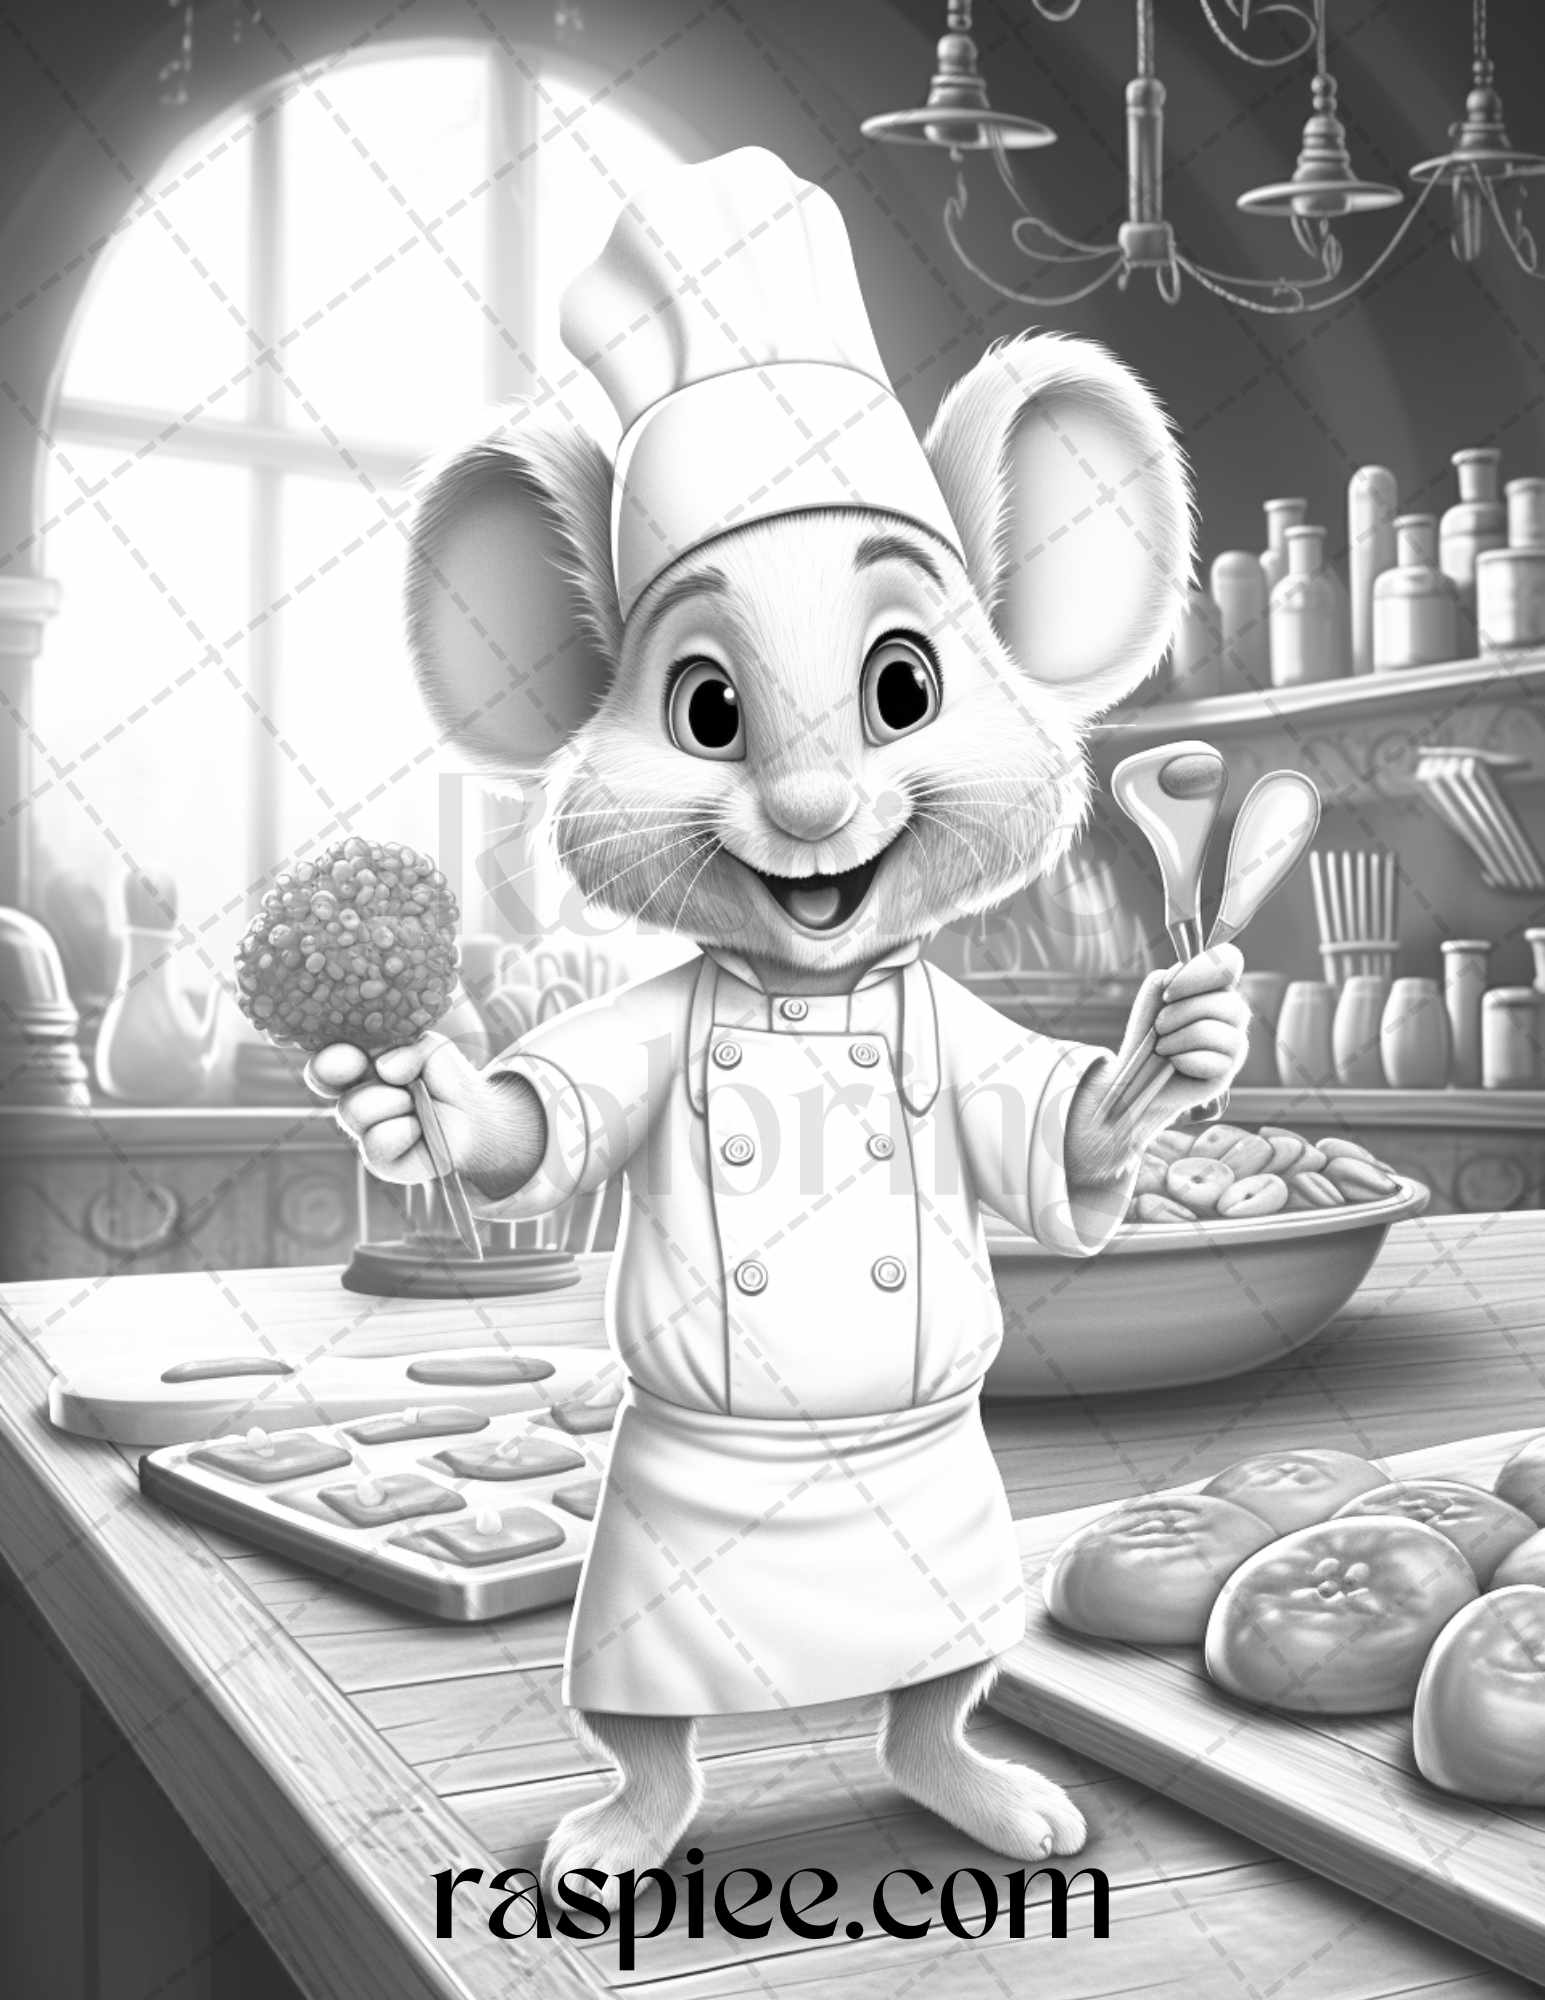 Grayscale coloring page mouse chef, Adult coloring book printable, Stress-relief coloring sheets, Detailed mouse chef illustration, Coloring for relaxation, Intricate coloring patterns, Therapeutic coloring pages, Mouse chef coloring printable, Coloring pages for grown-ups, Creative hobby coloring